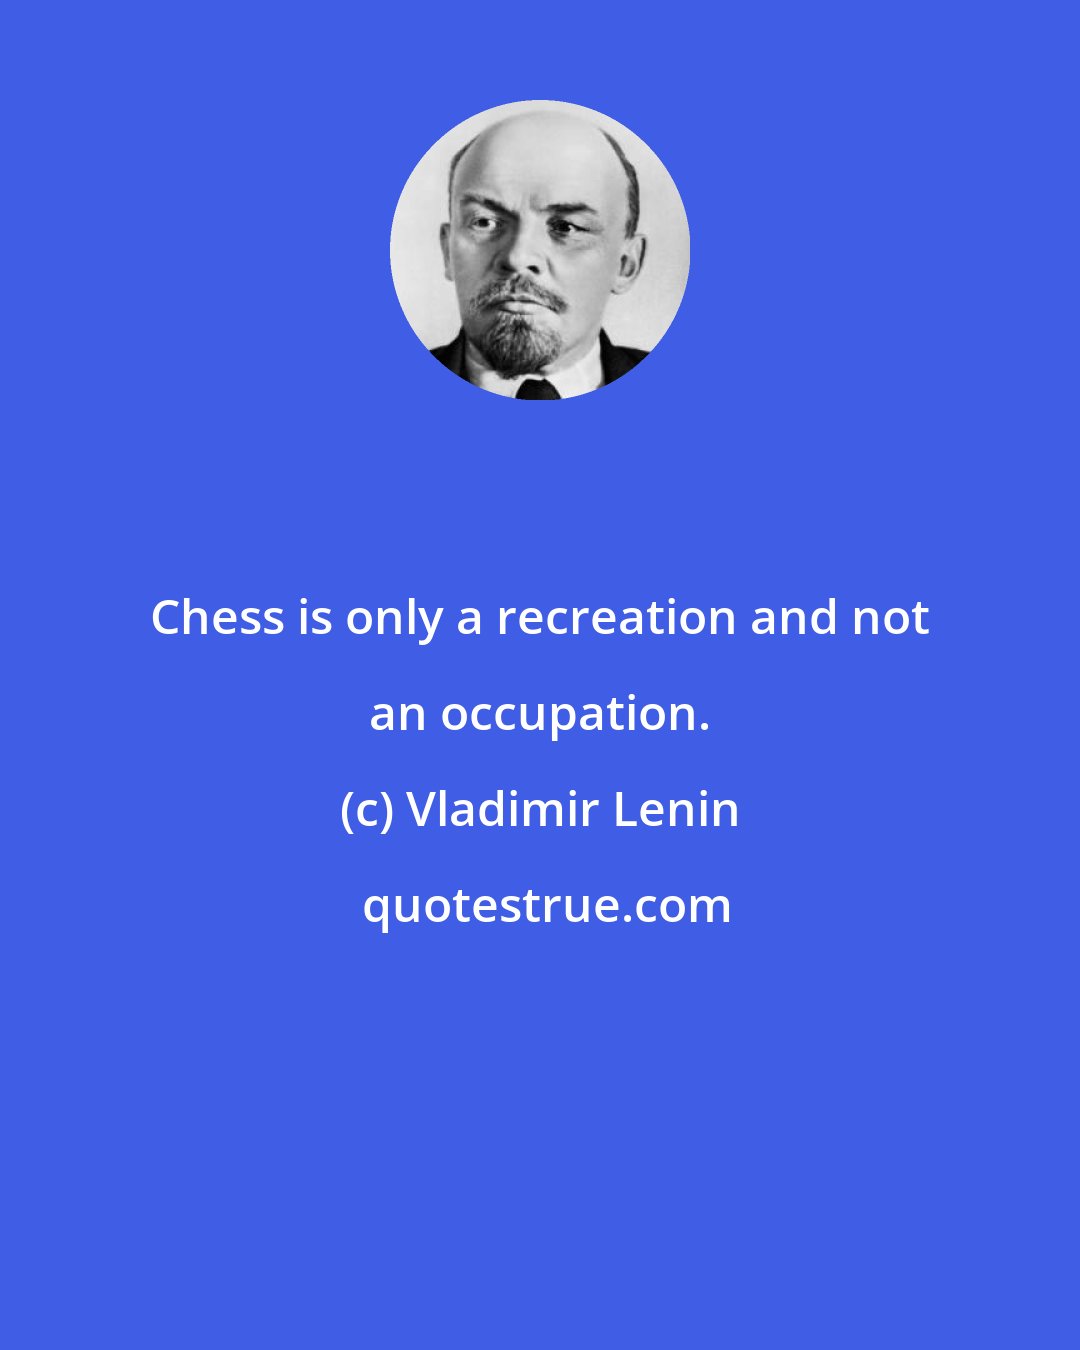 Vladimir Lenin: Chess is only a recreation and not an occupation.